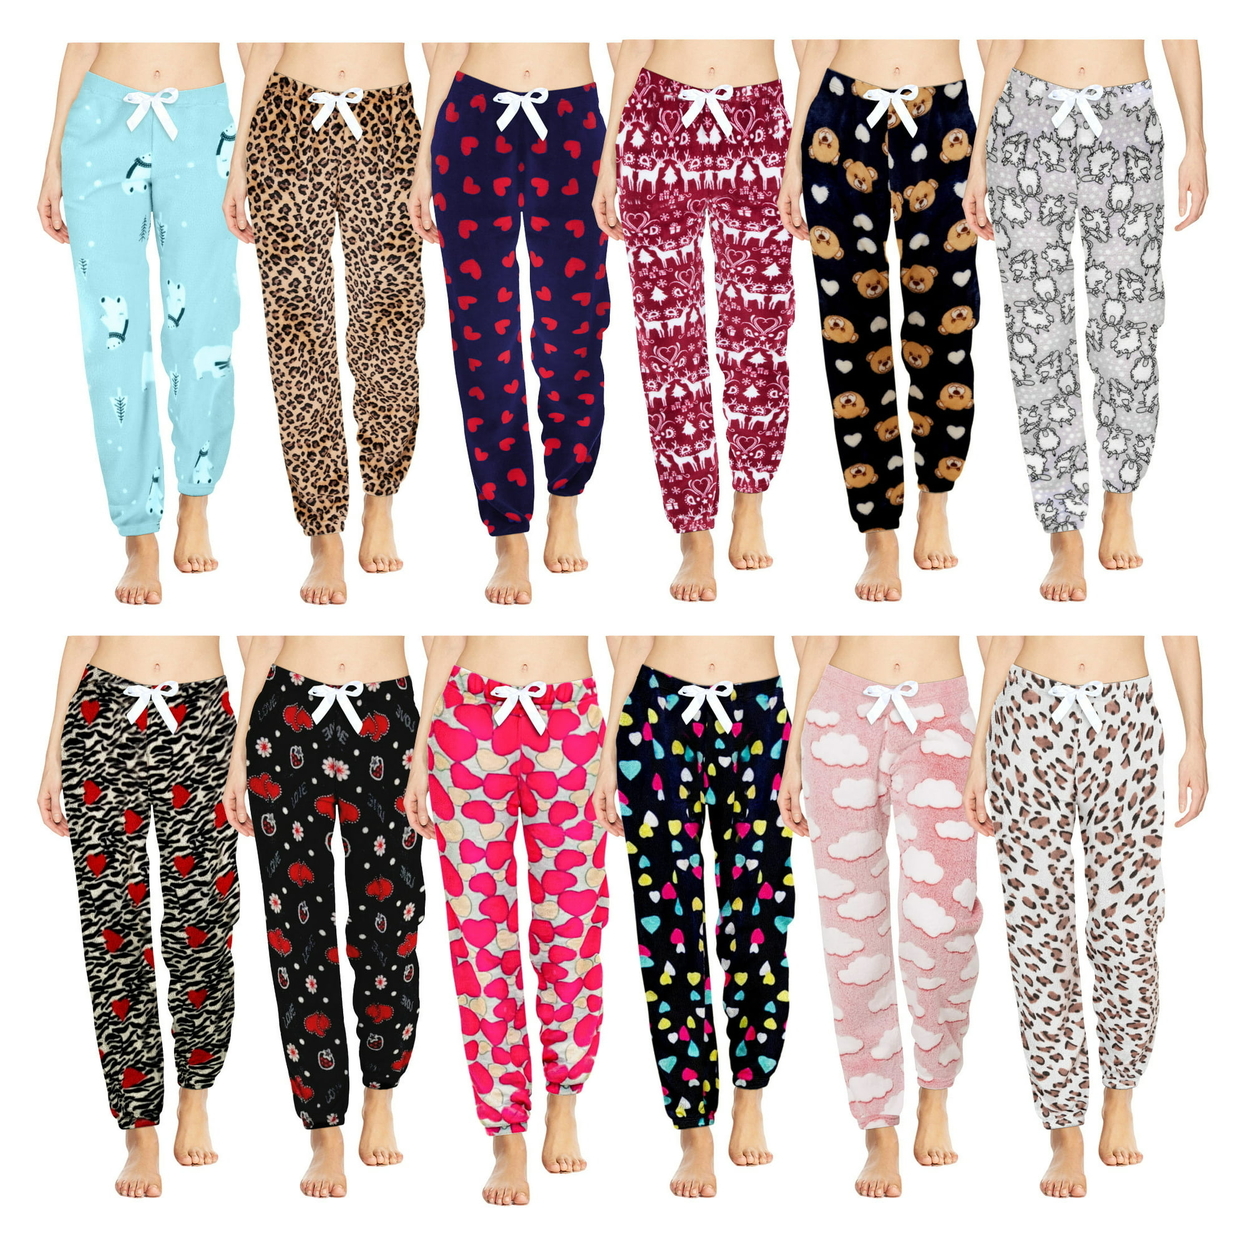 4-Pack: Women's Printed Ultra-Soft Comfy Stretch Micro-Fleece Pajama Lounge Pants - Small, Shapes